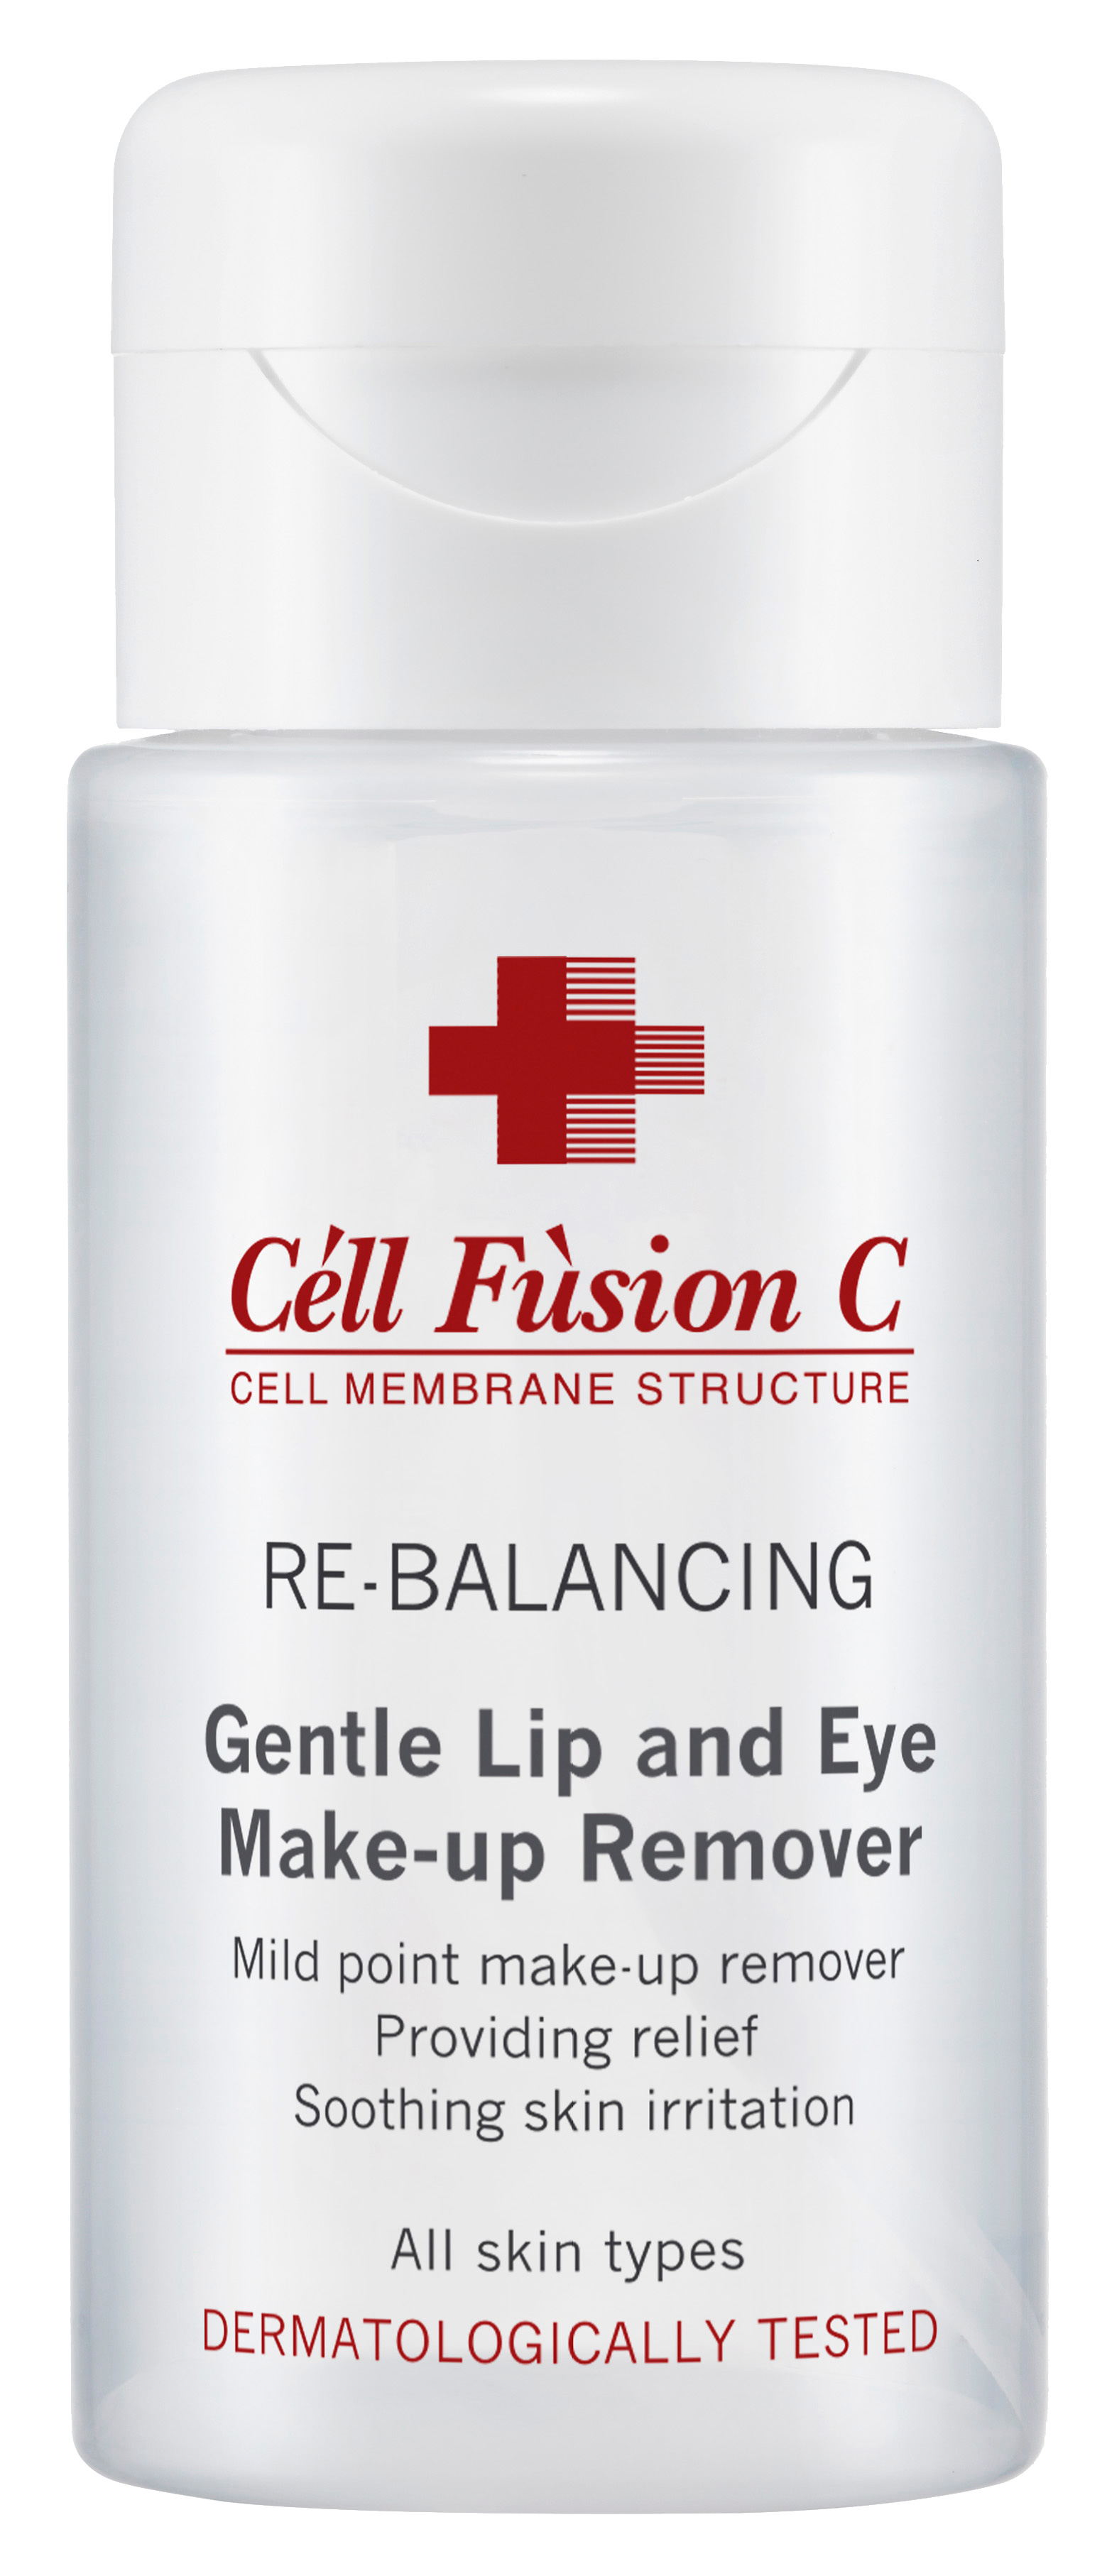 Cell Fusion C Cleanser Line